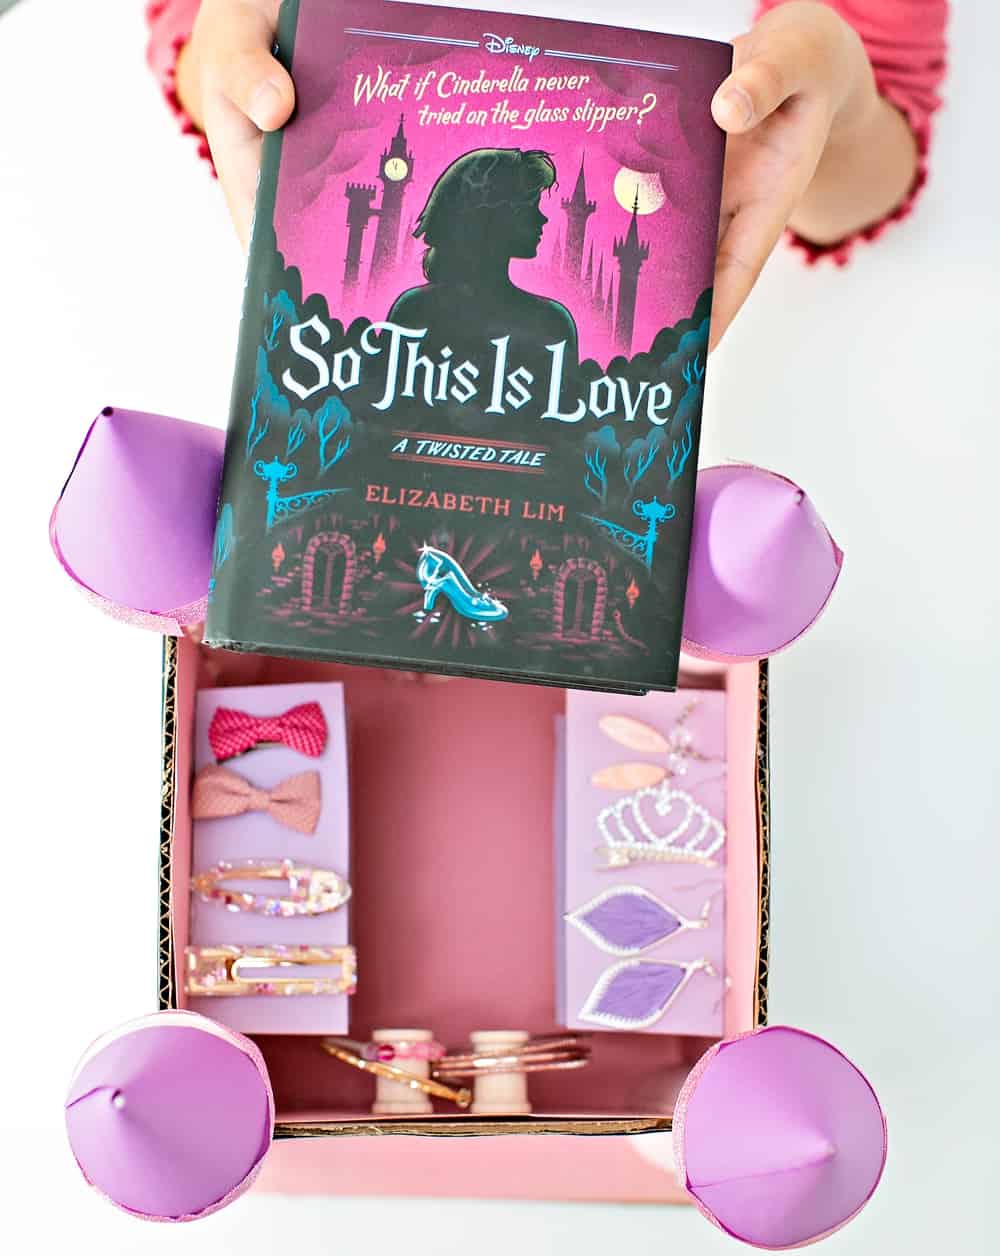 Cardboard Castle inspired by So This is Love book